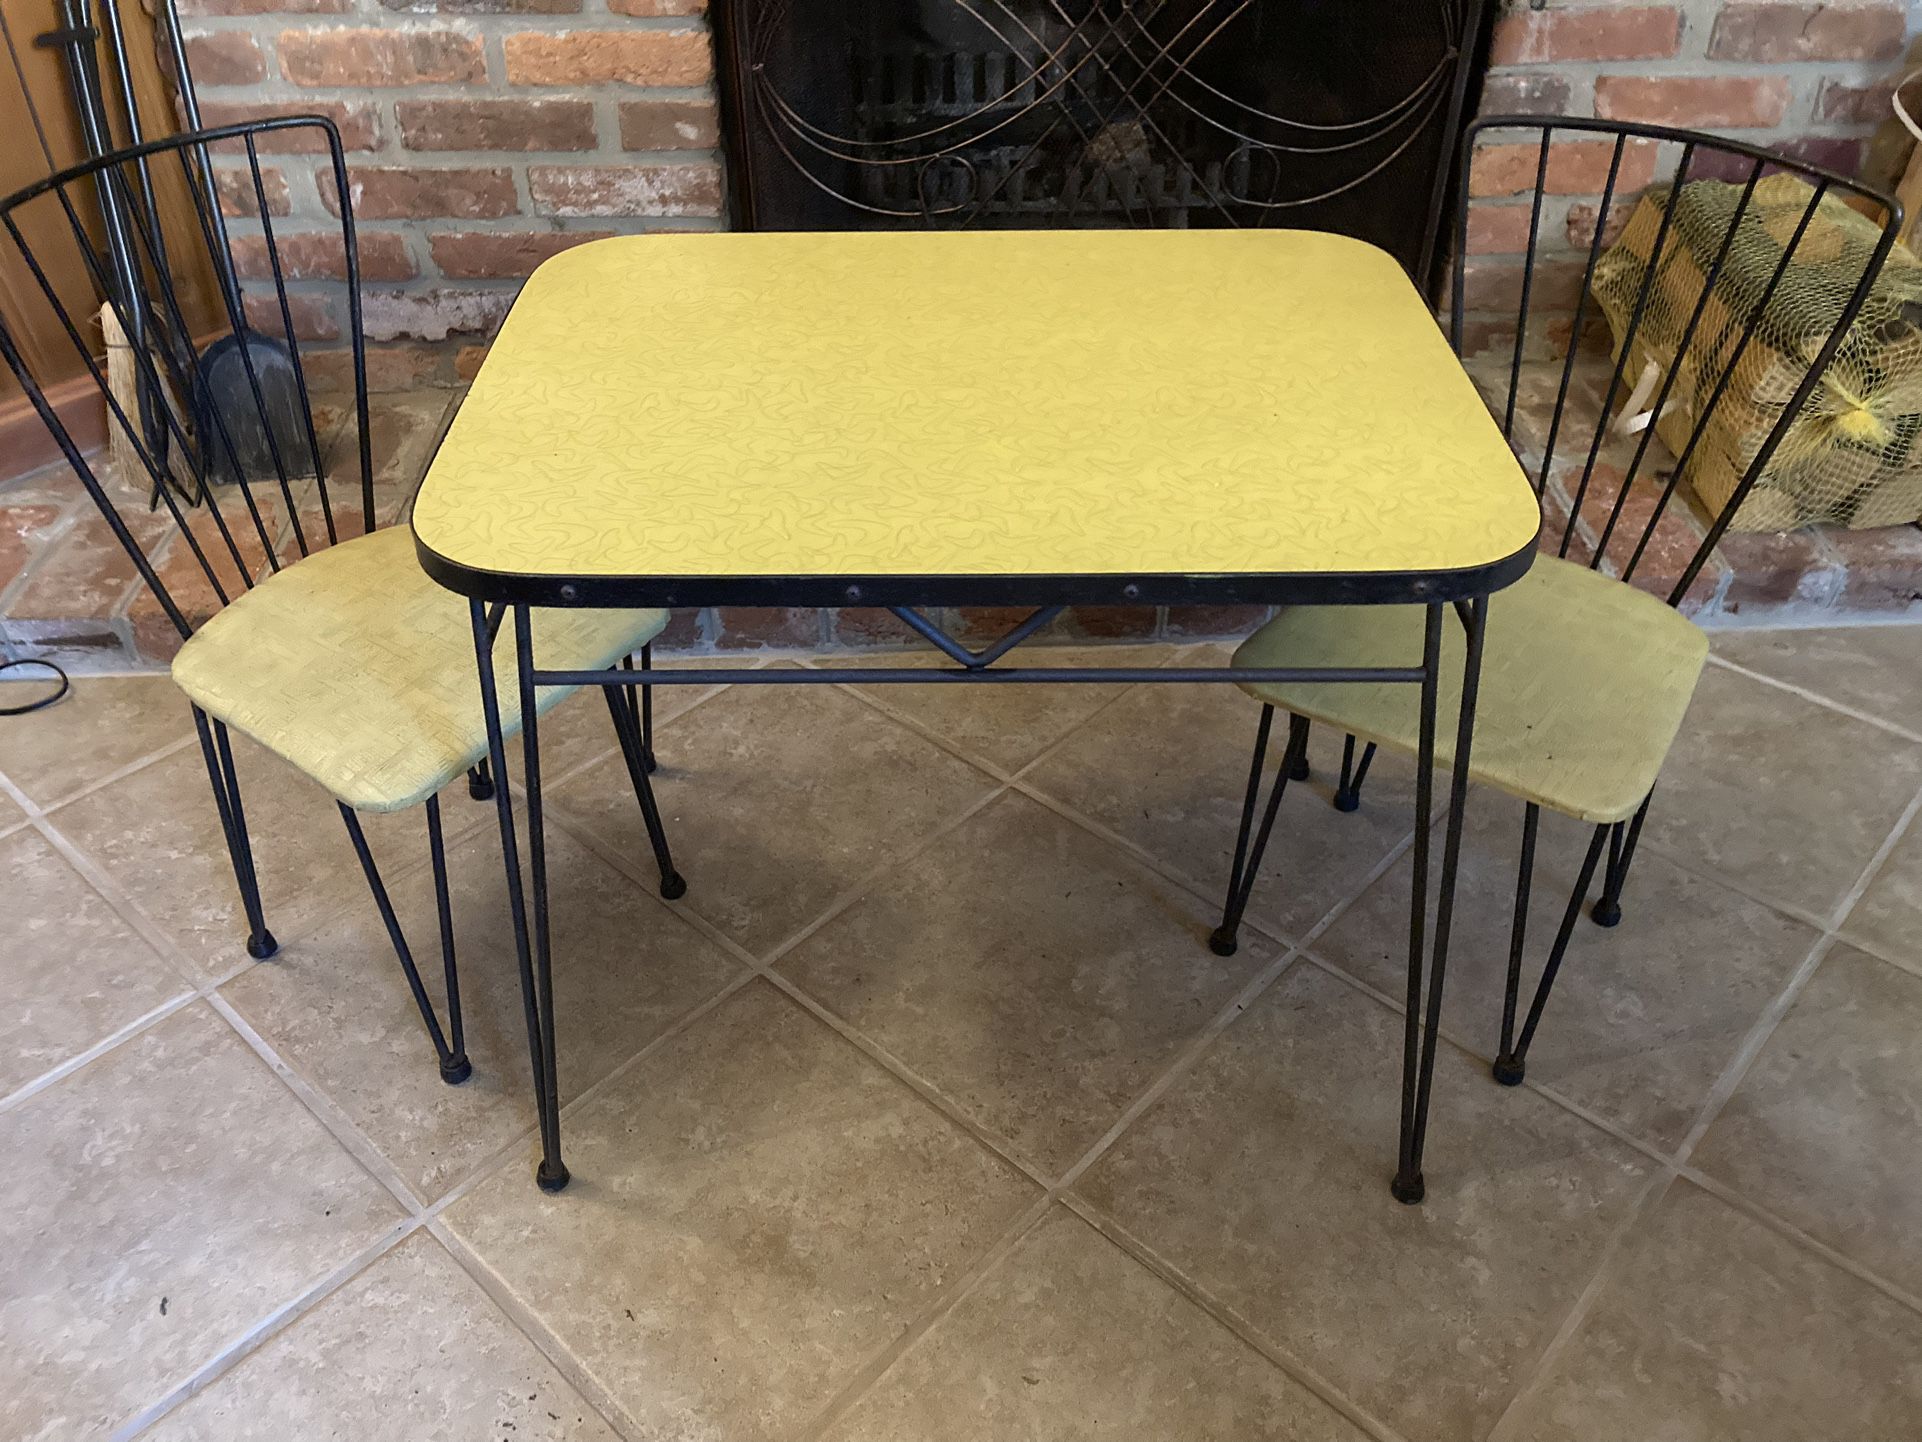 MCM Vintage Children’s Table and Chairs